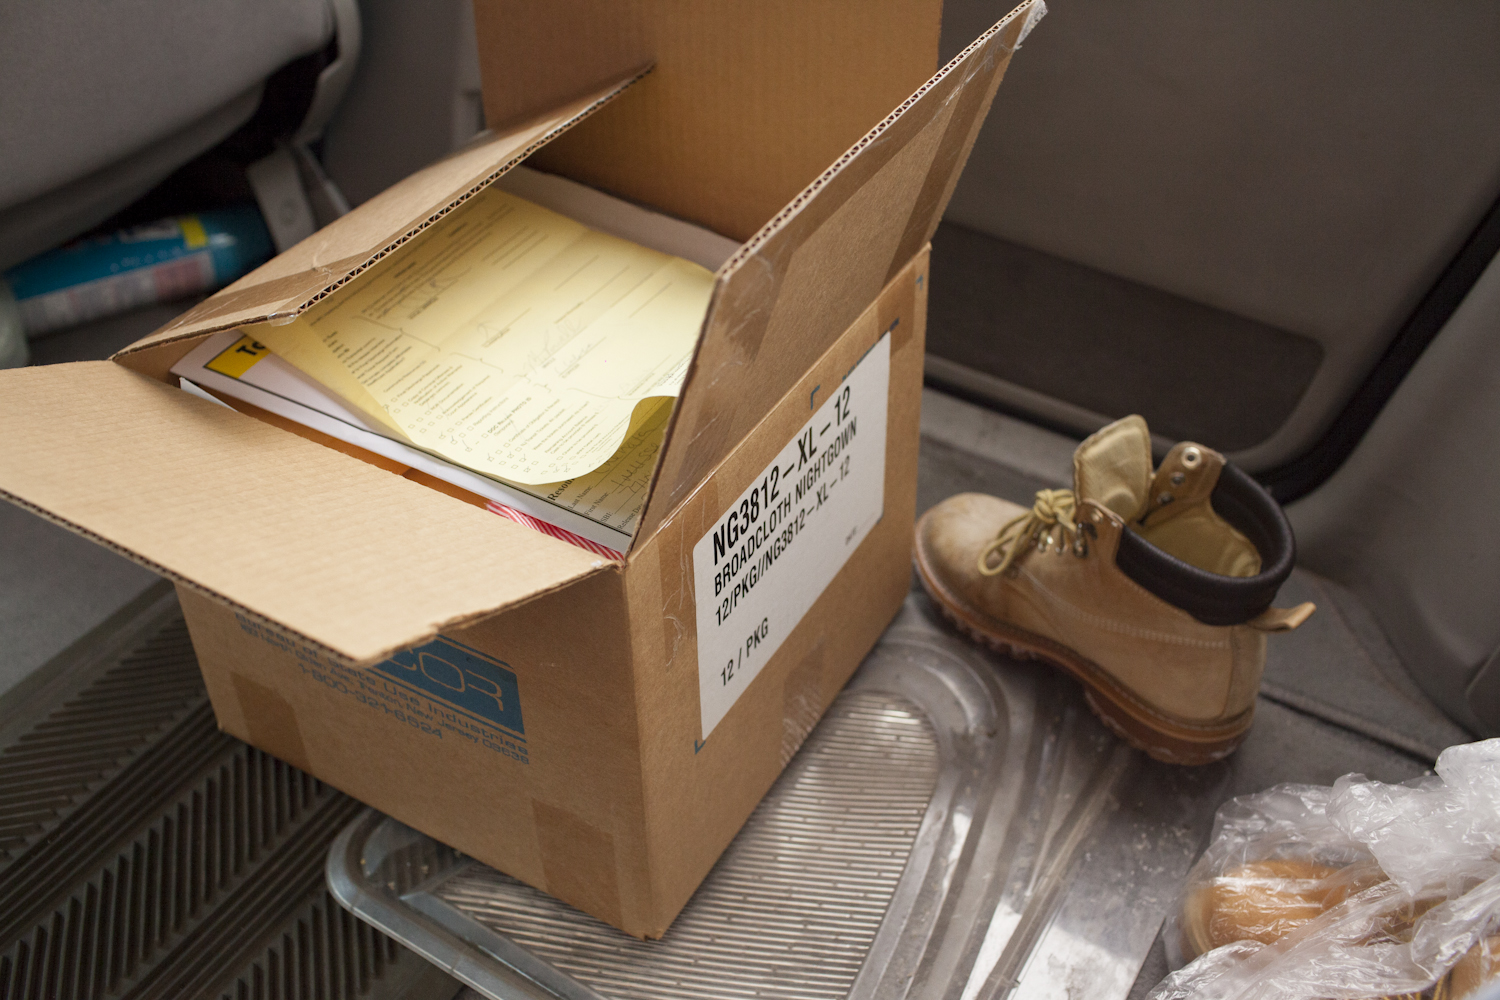  Upon leaving, all of Bibi's belongings are packed into this one box. Her release I.D. and paperwork prove to be no help in the coming weeks.&nbsp; 